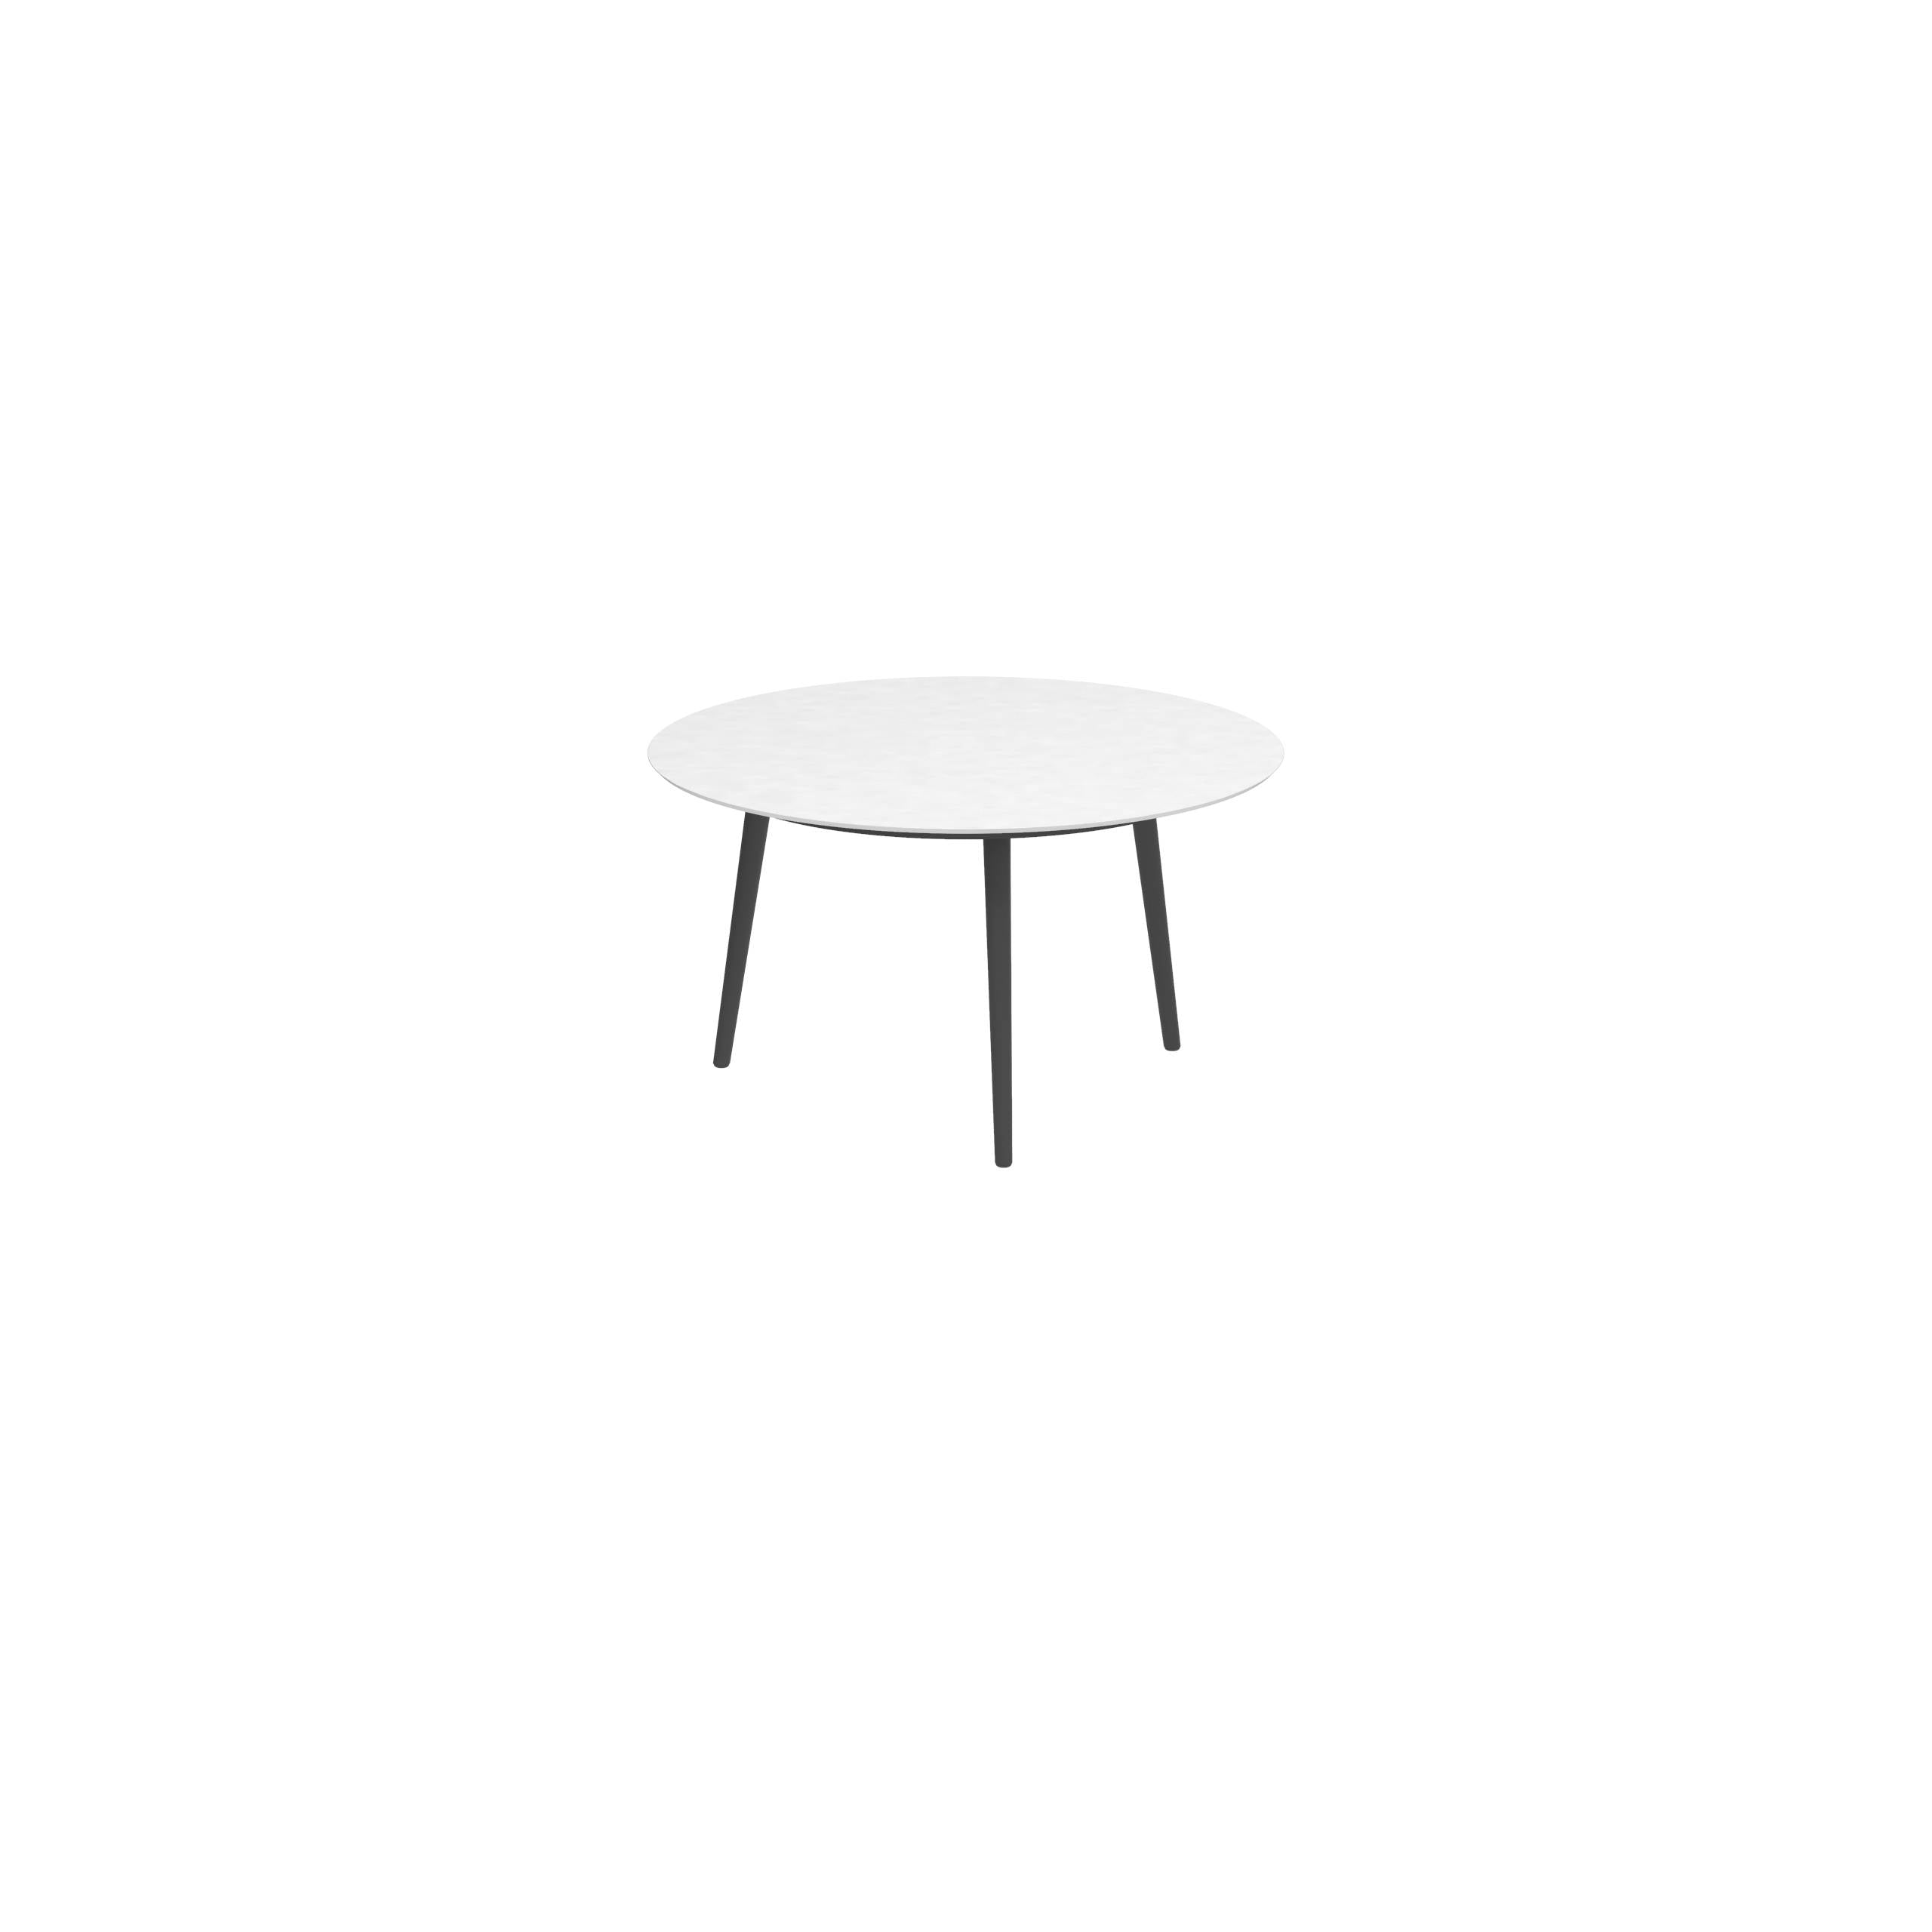 Styletto Low Dining Table Ø 120cm Alu Legs Anthracite Ceramic Top White